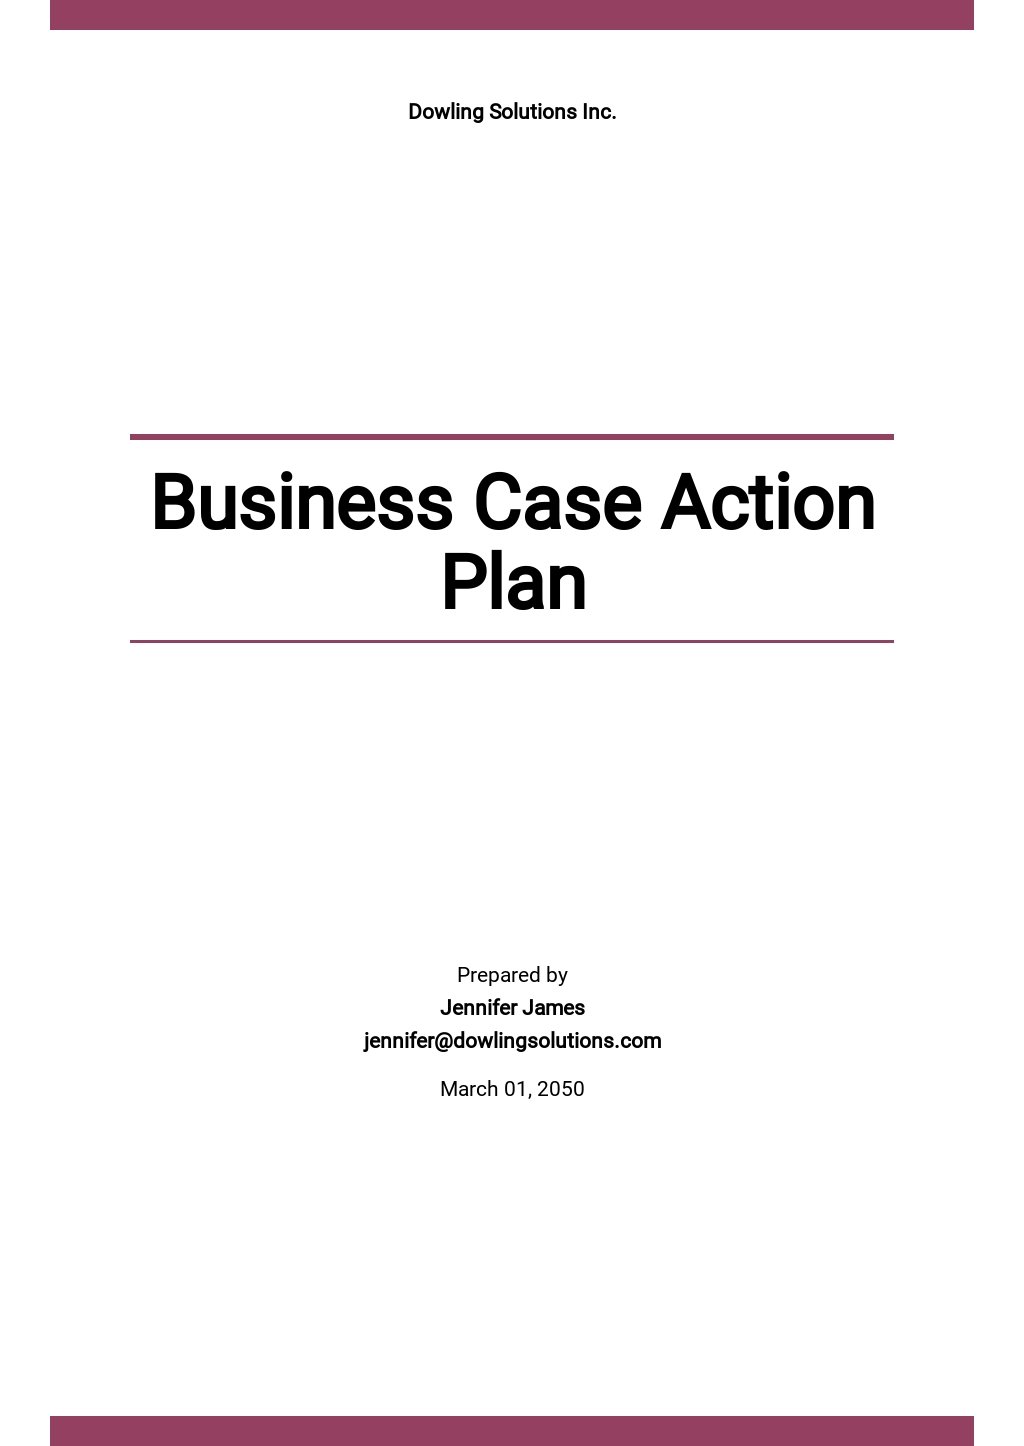 Business Case Action Plan Template